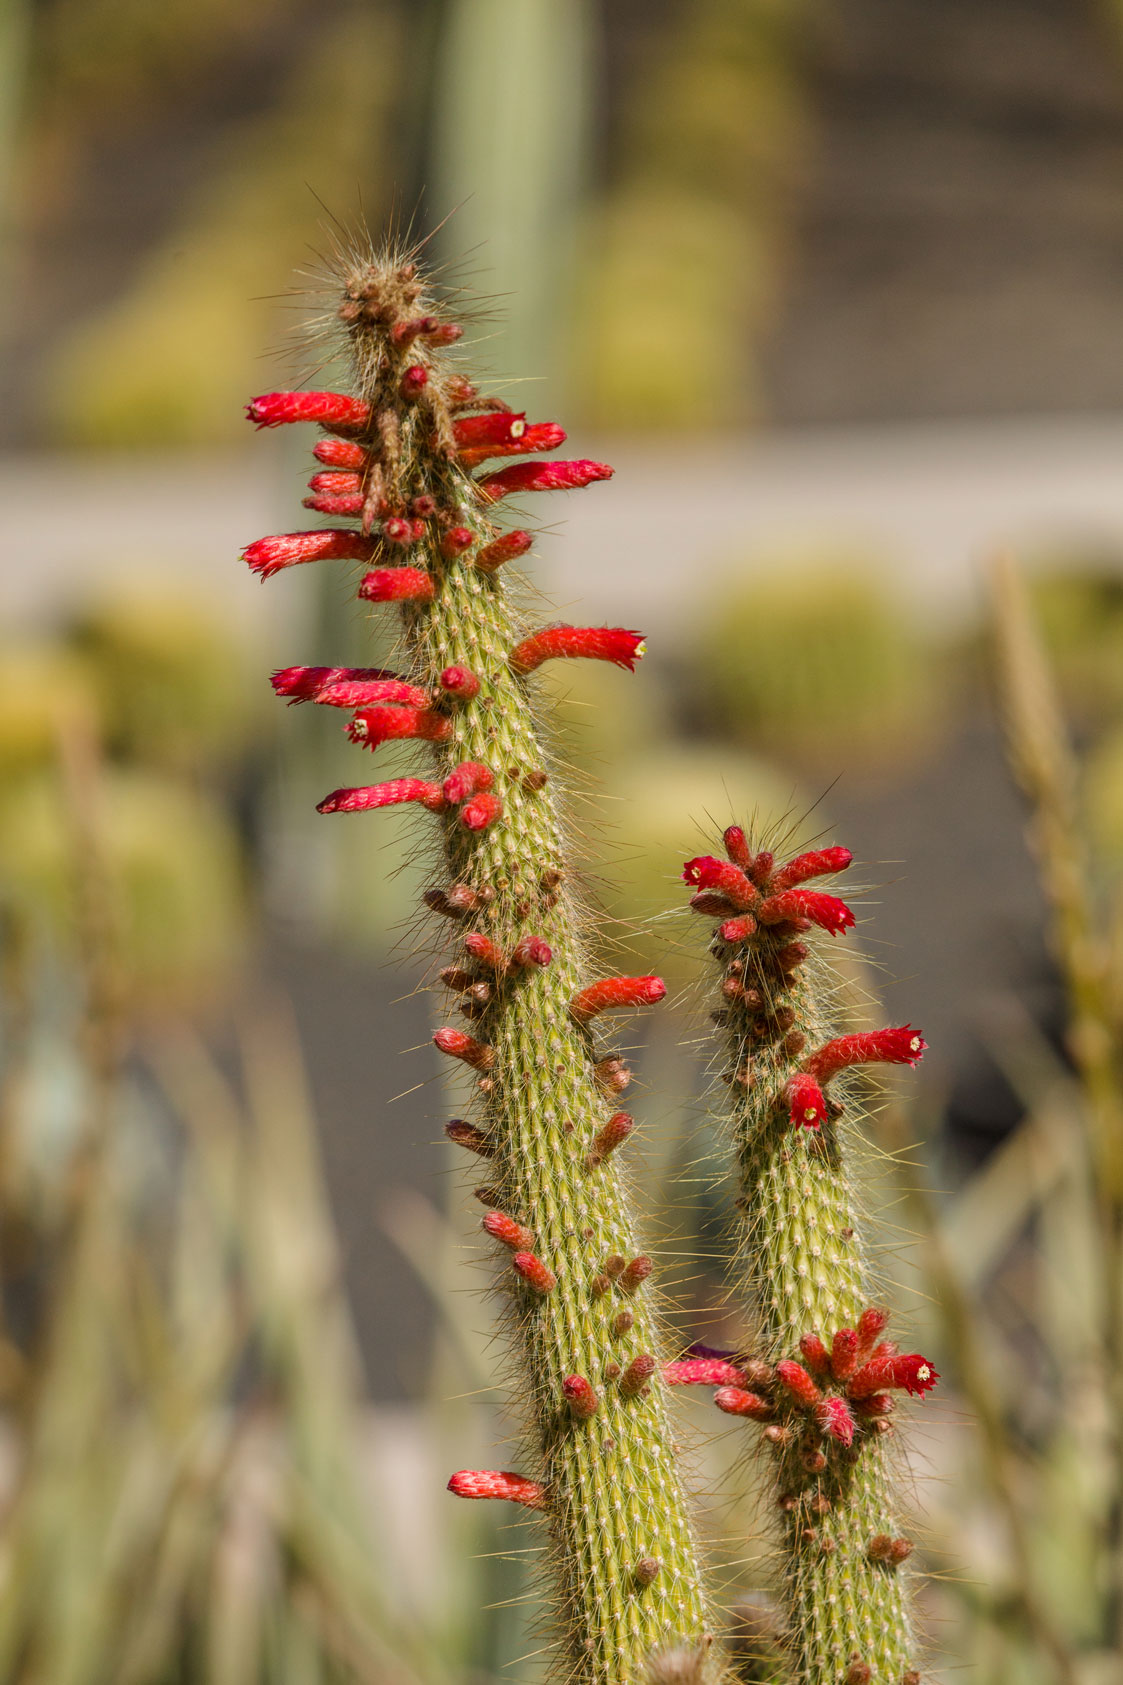 A close look at the top of a Silver Torch cactus, covered in bunches of thin bright red flower buds.